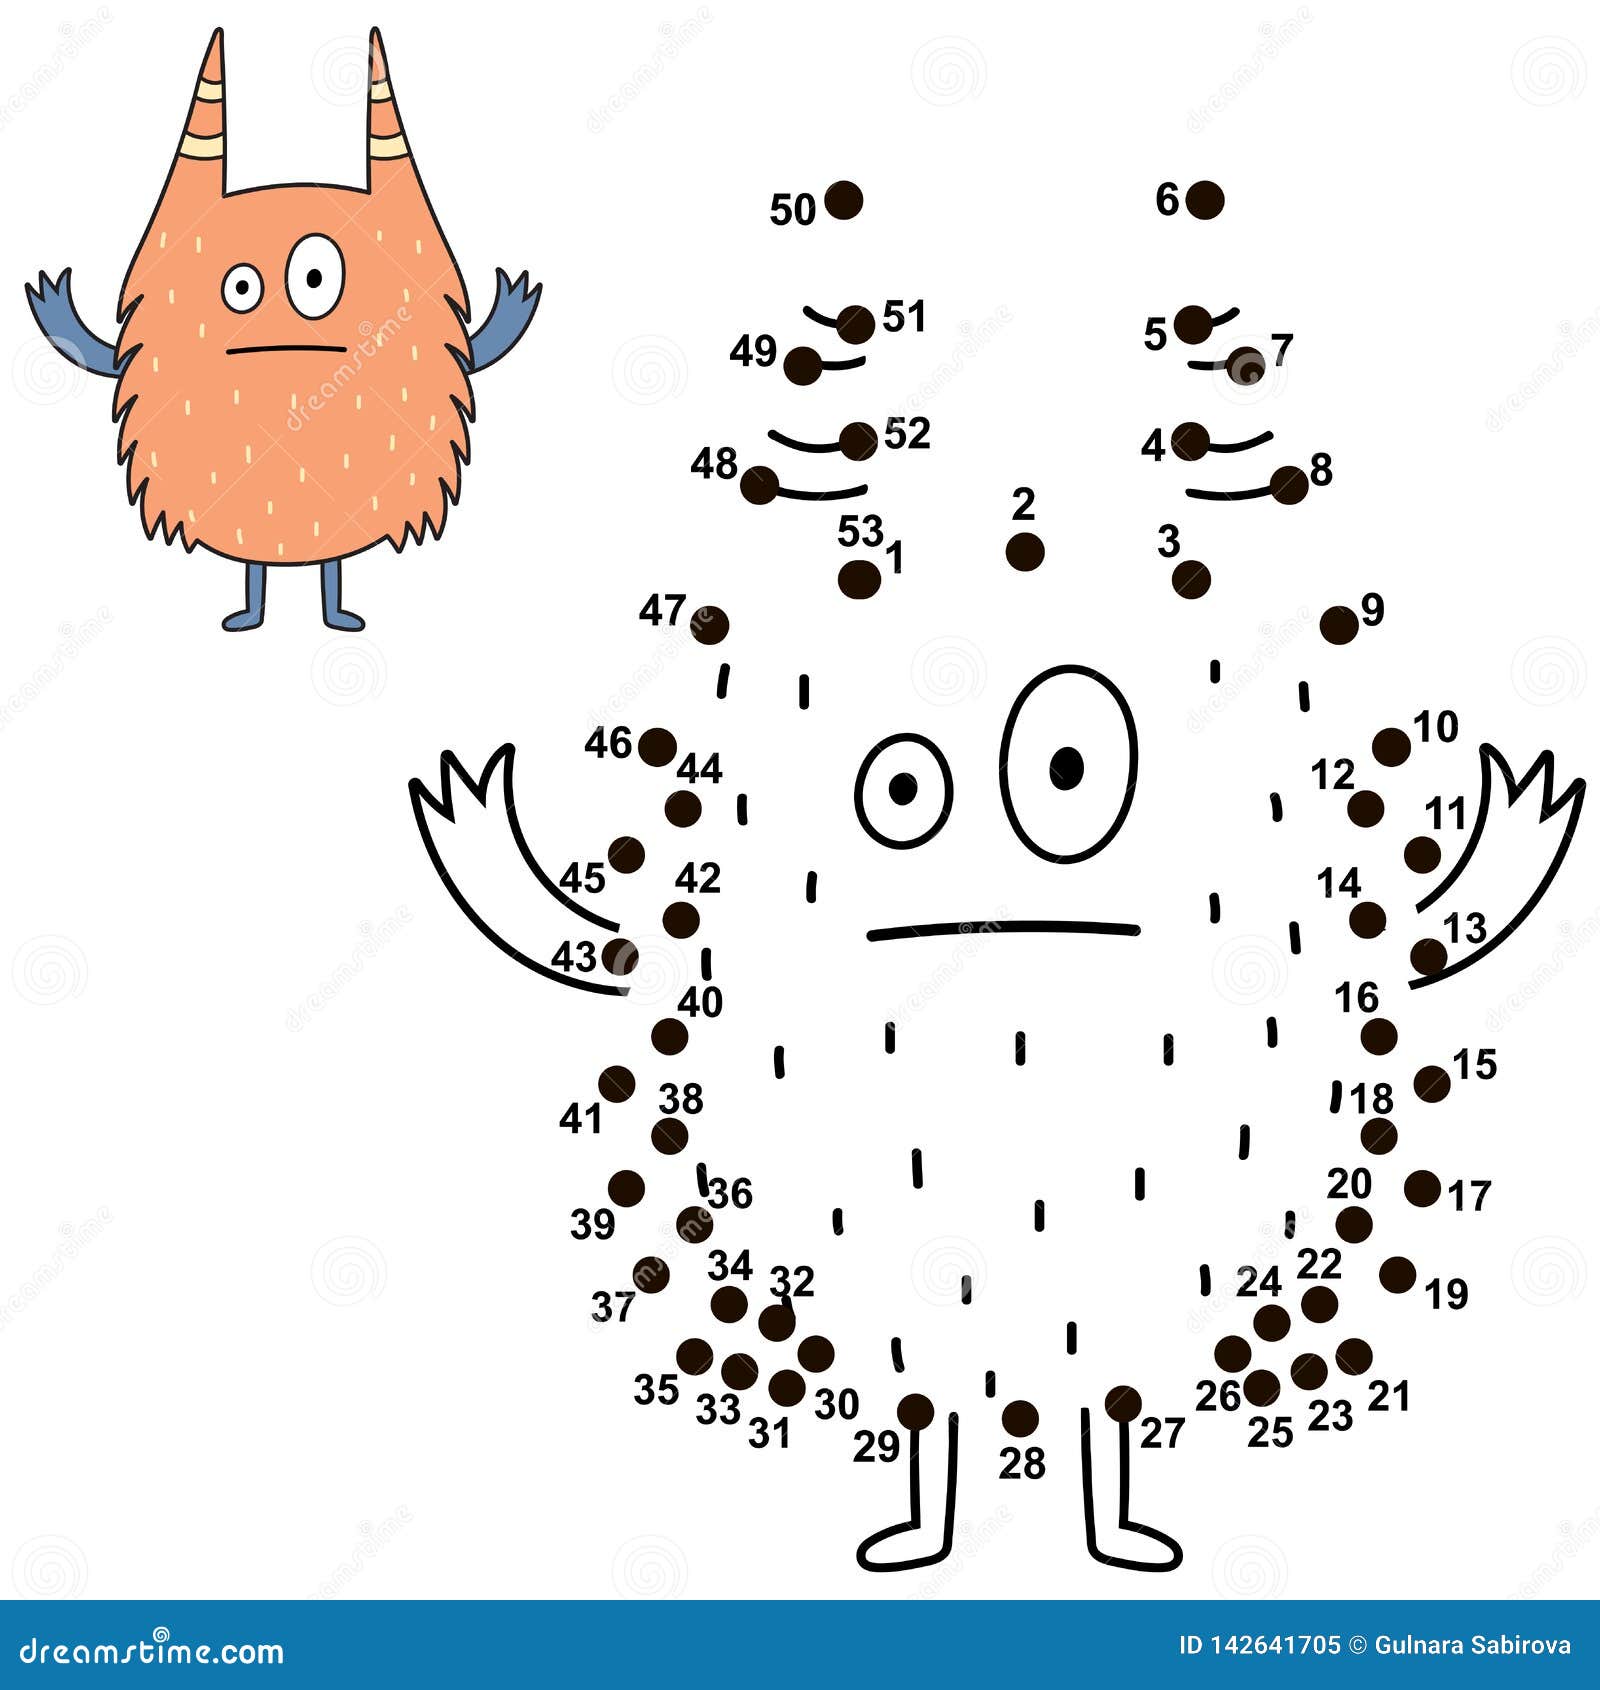 connect the dots and draw a funny monster. numbers game for children